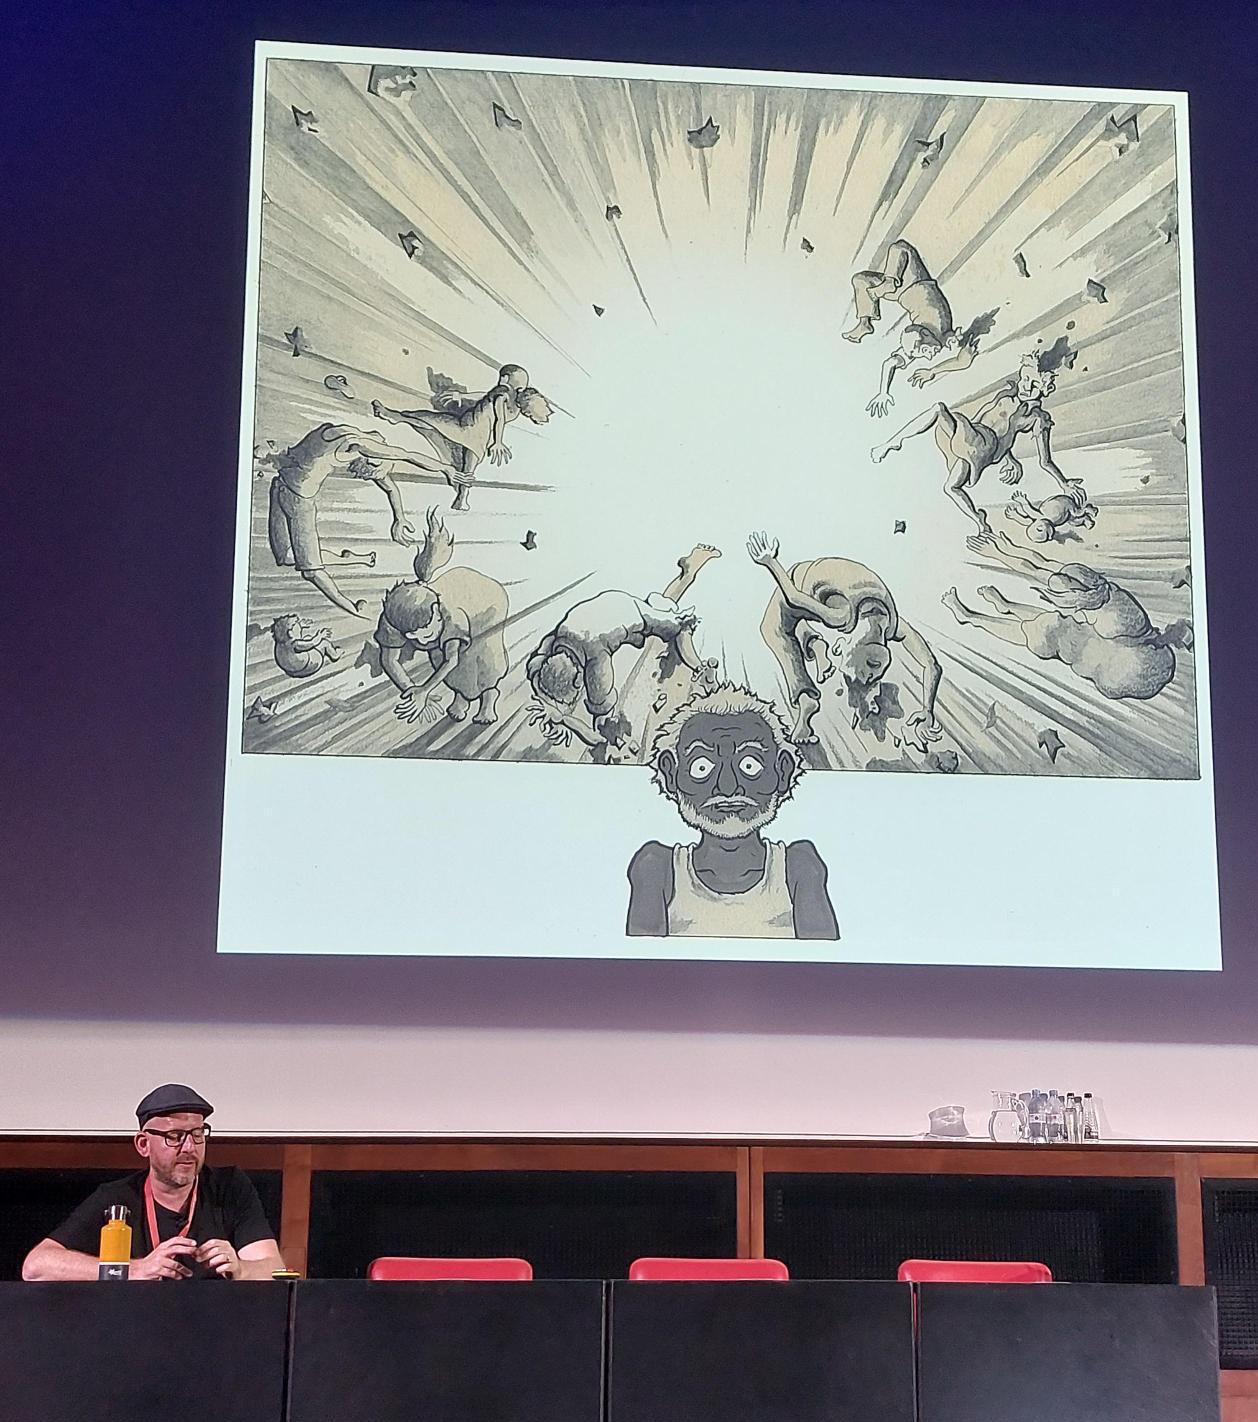 A panelist sits beneath a large screen showing a single panel from the graphic novel. The illustration shows a man in front of an explosion.